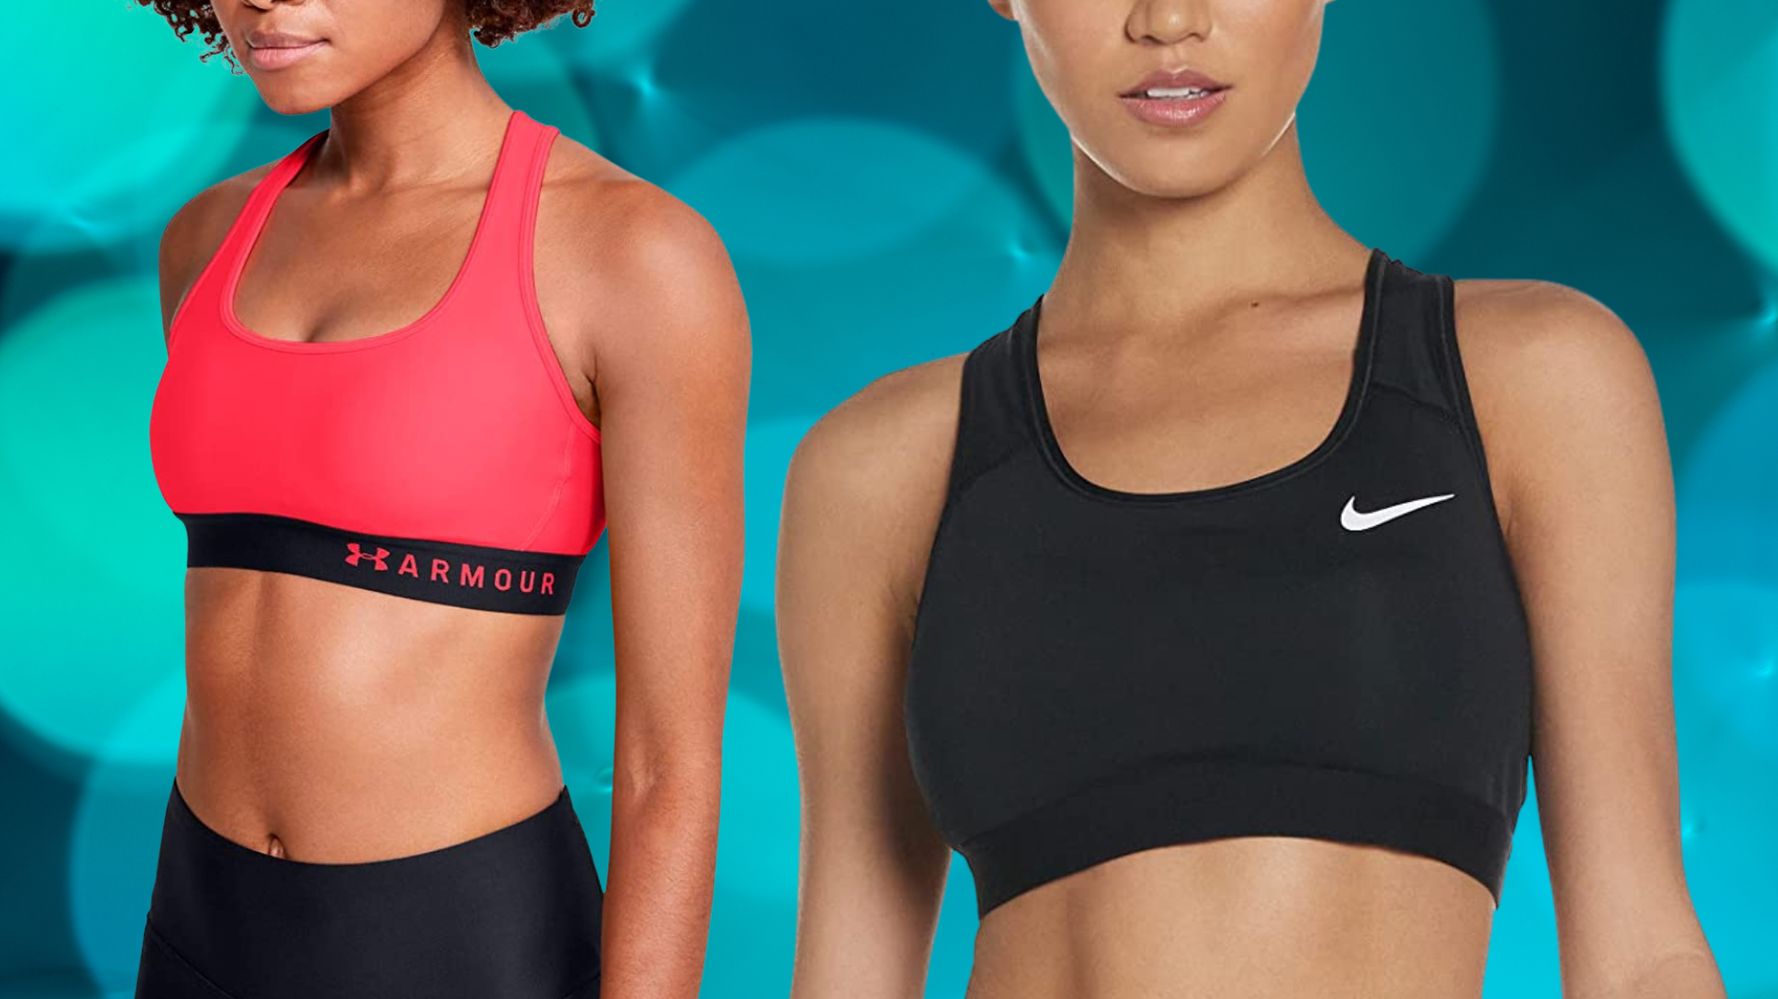 Best Sports Bras: The Top 5 Bras For All The Support You Need